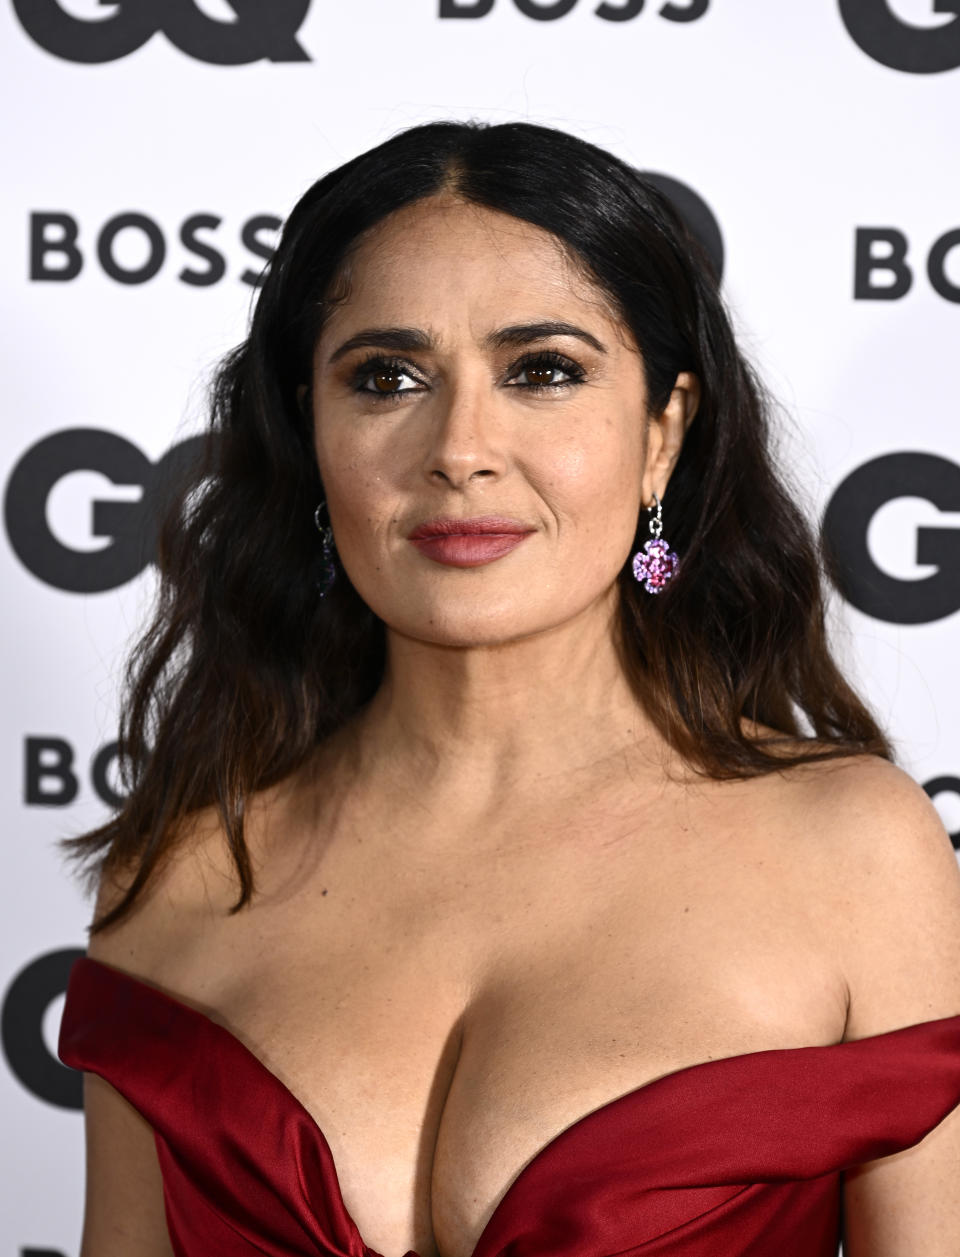 Salma Hayek pictured at the GQ Men of the Year awards. (Getty Images)